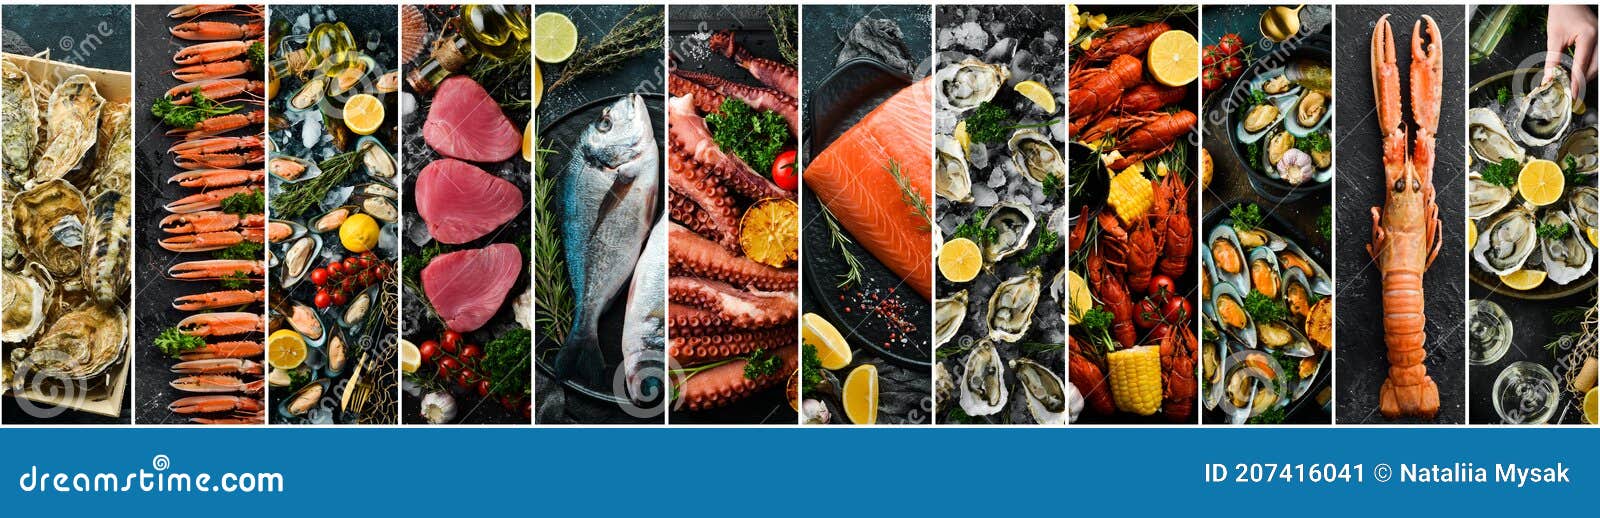 photo collage. seafood: fresh fish, crustaceans and shellfish